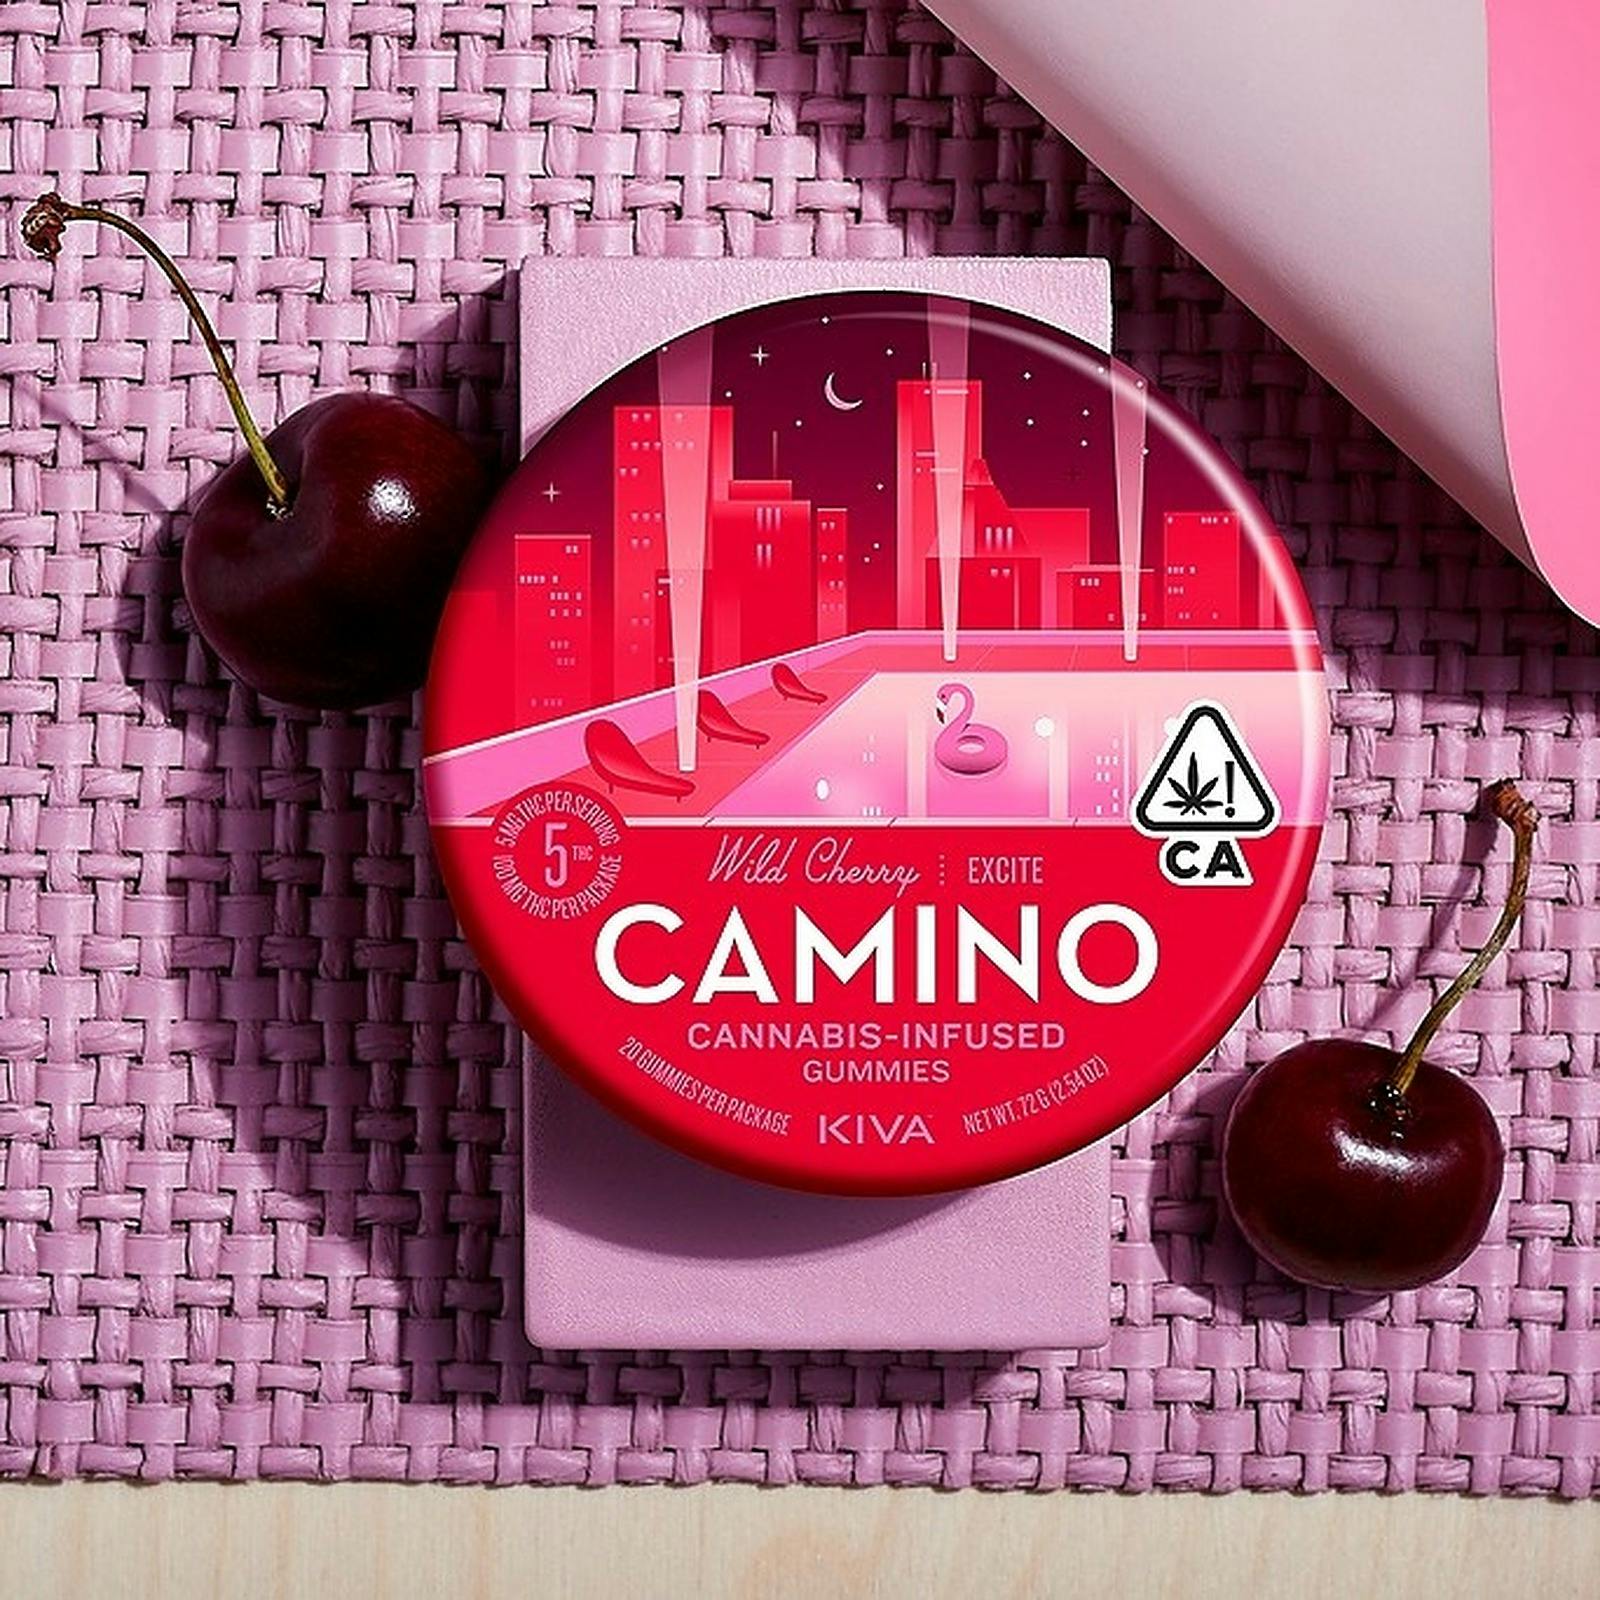 Camino 5mg Camino Excite Wild Cherry Gummies 100mg Thc Total Leafly